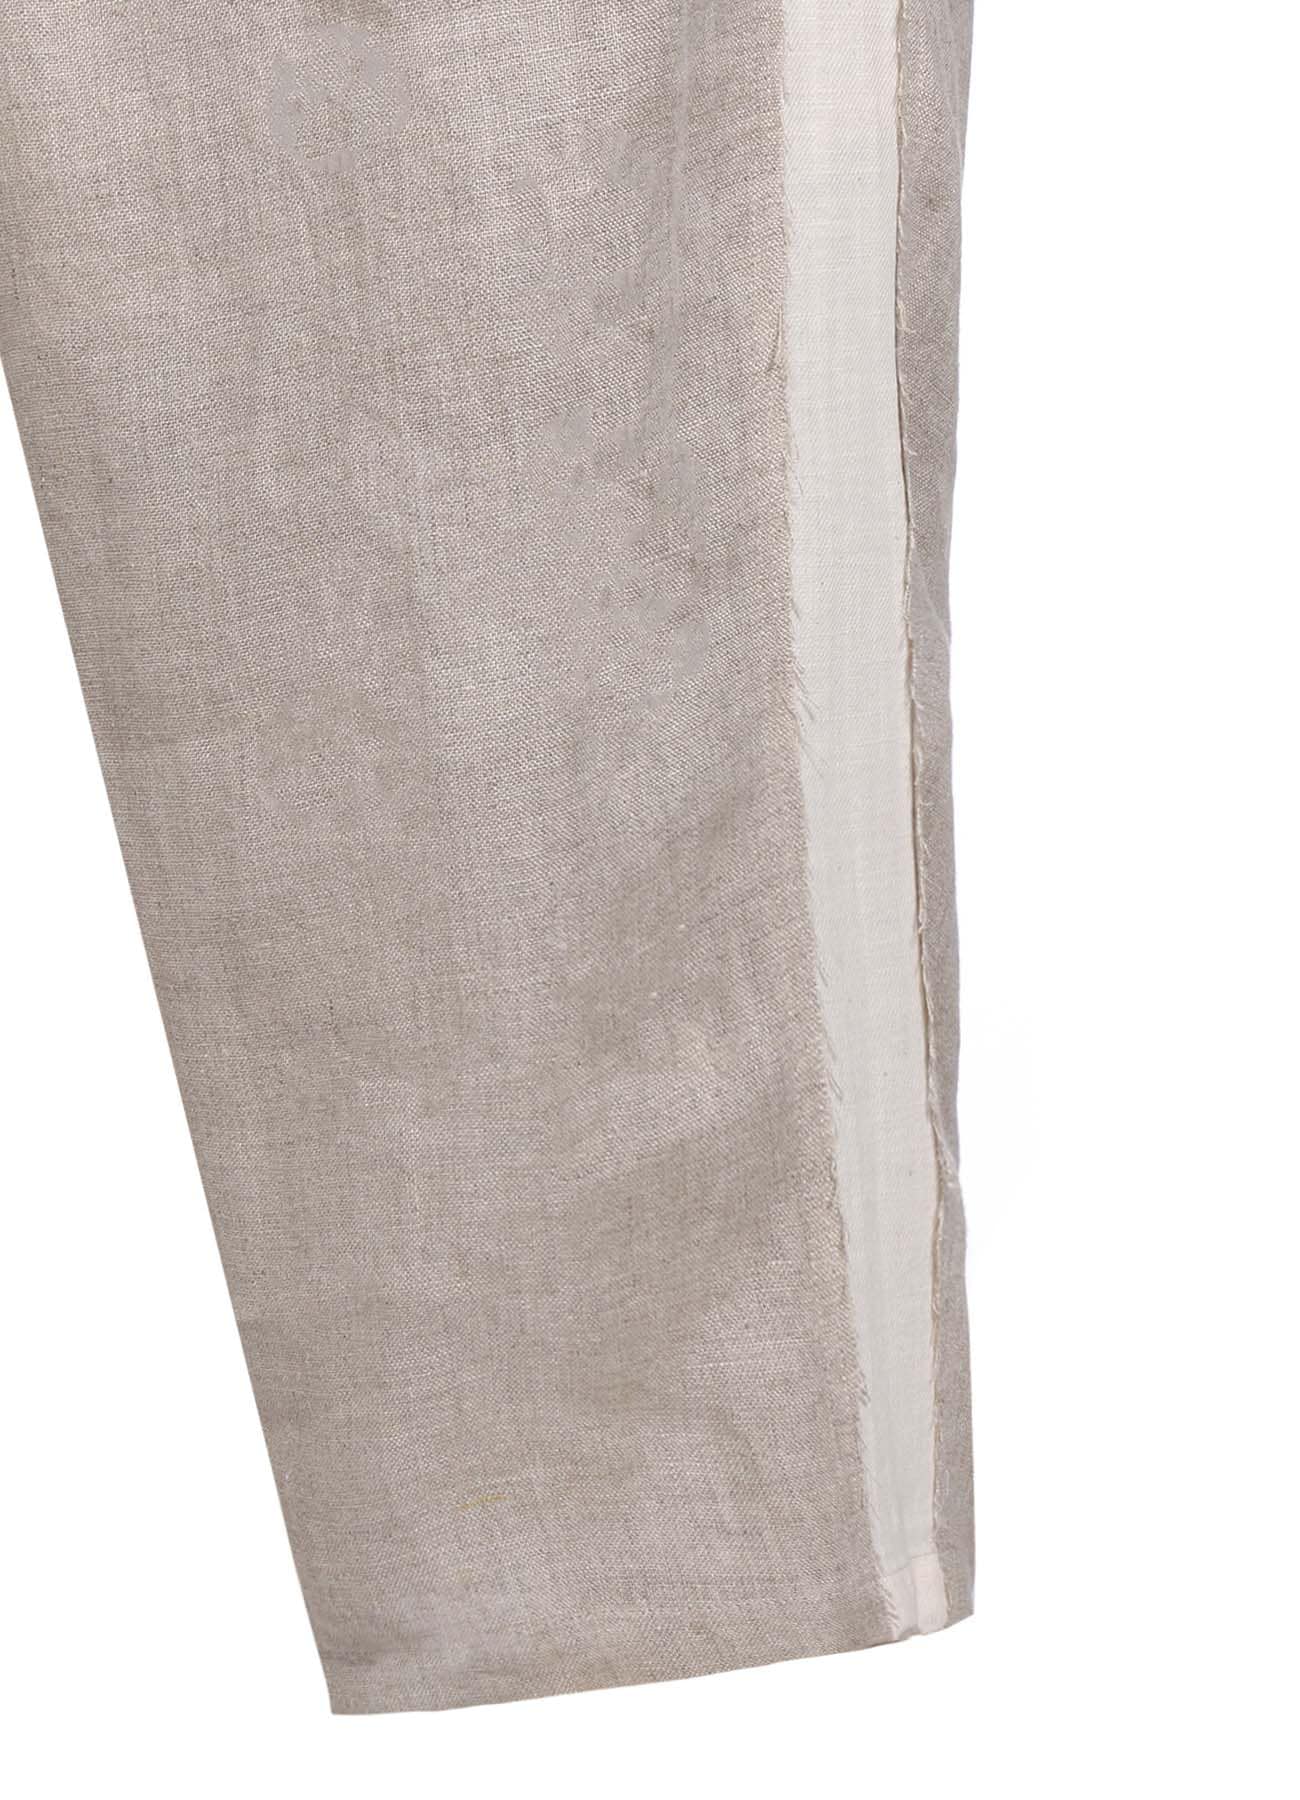 LINEN GAUZE DUAL FABRIC 12-PLEATED PANTS WITH SIDE TAPE